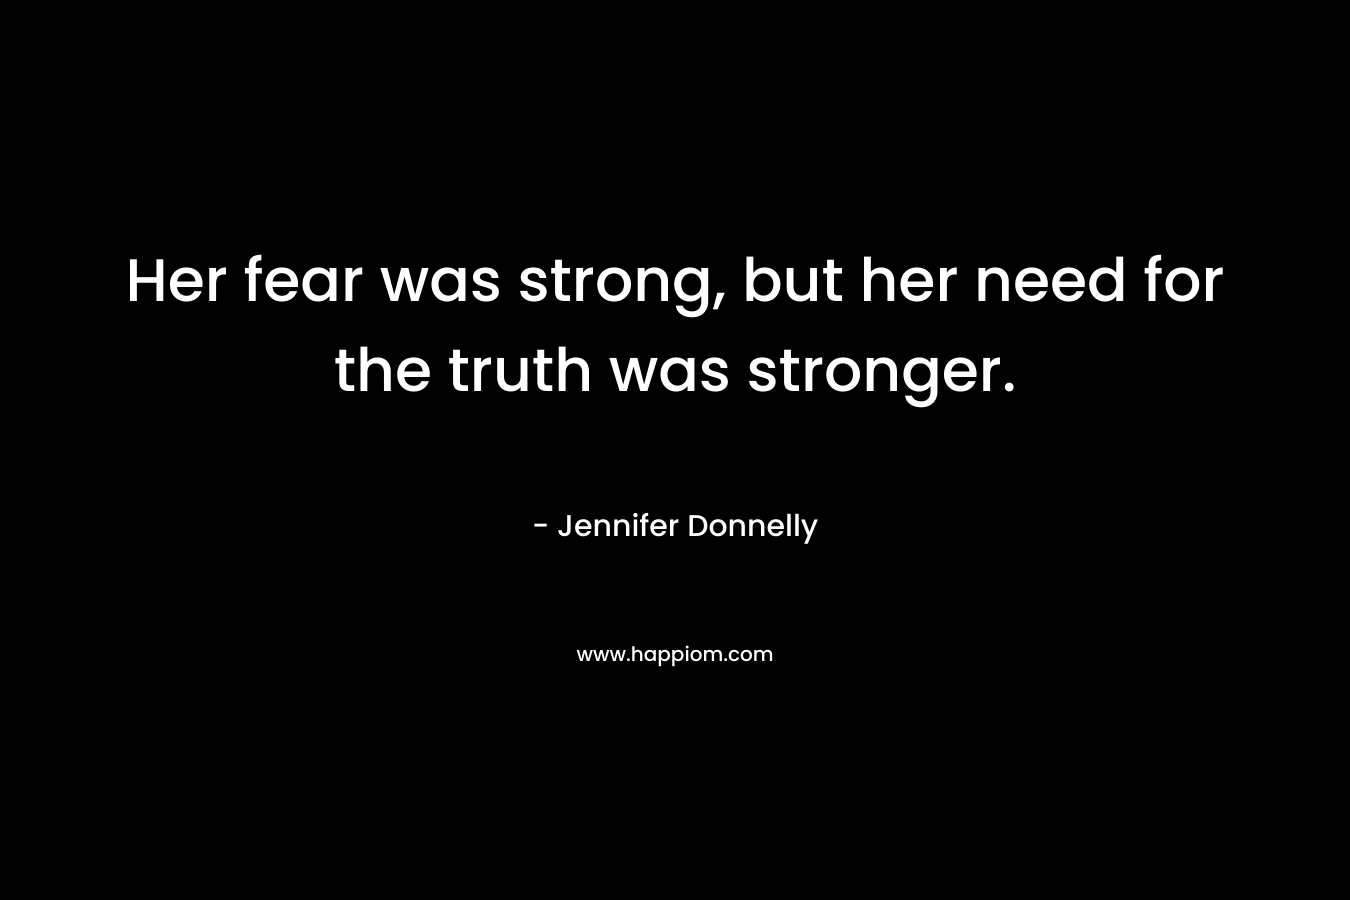 Her fear was strong, but her need for the truth was stronger.